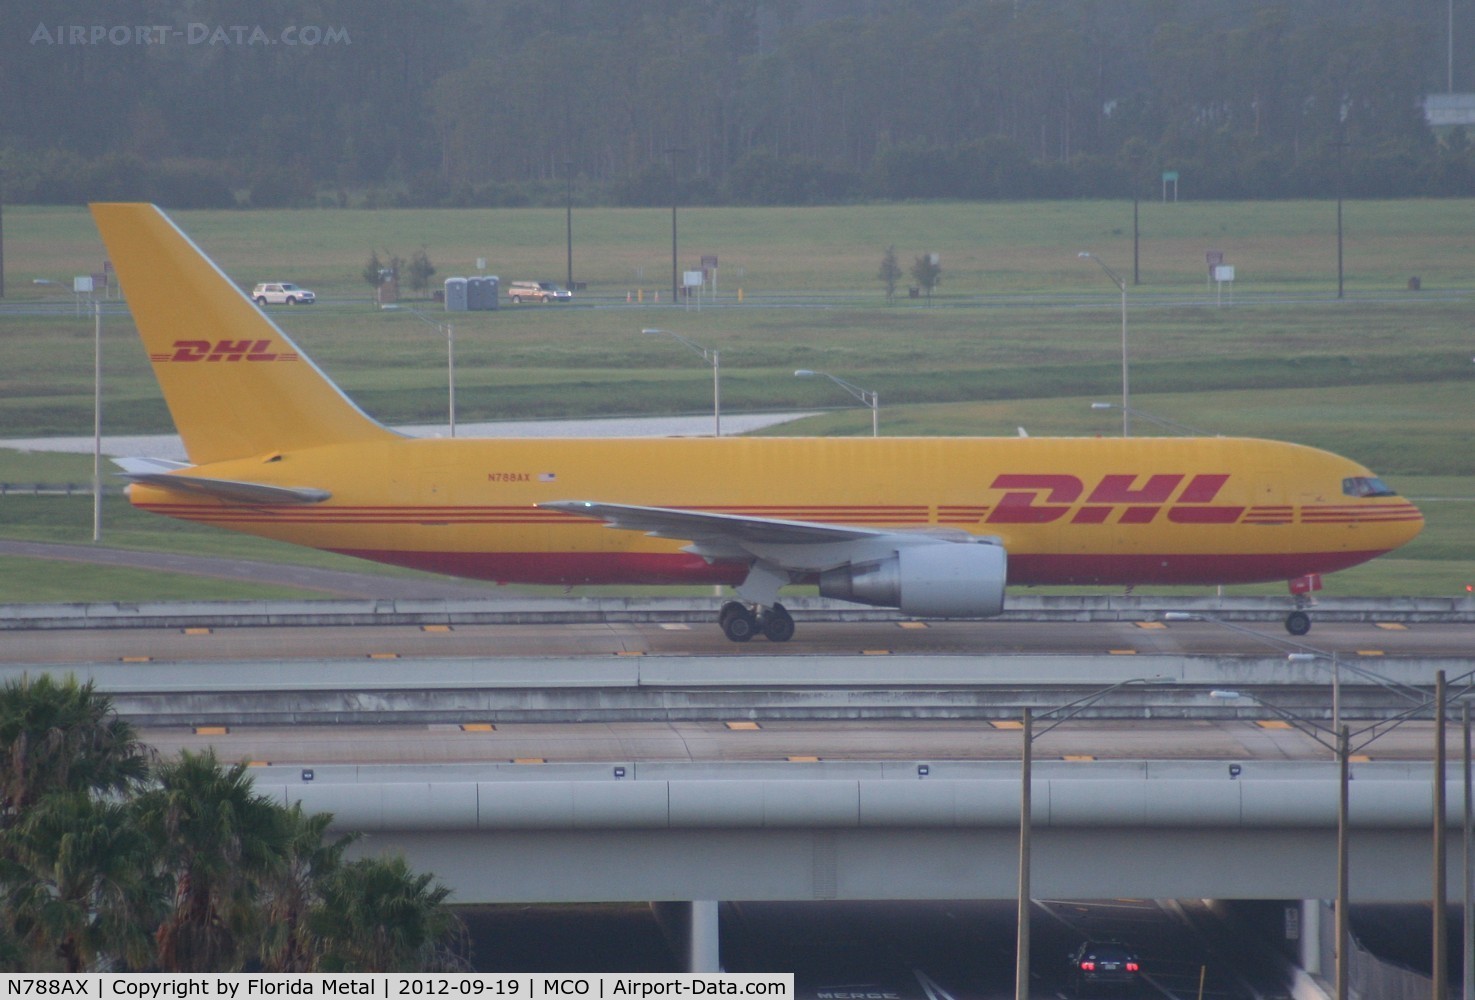 N788AX, 1984 Boeing 767-281 C/N 23021, DHL 767-200 early morning arrival